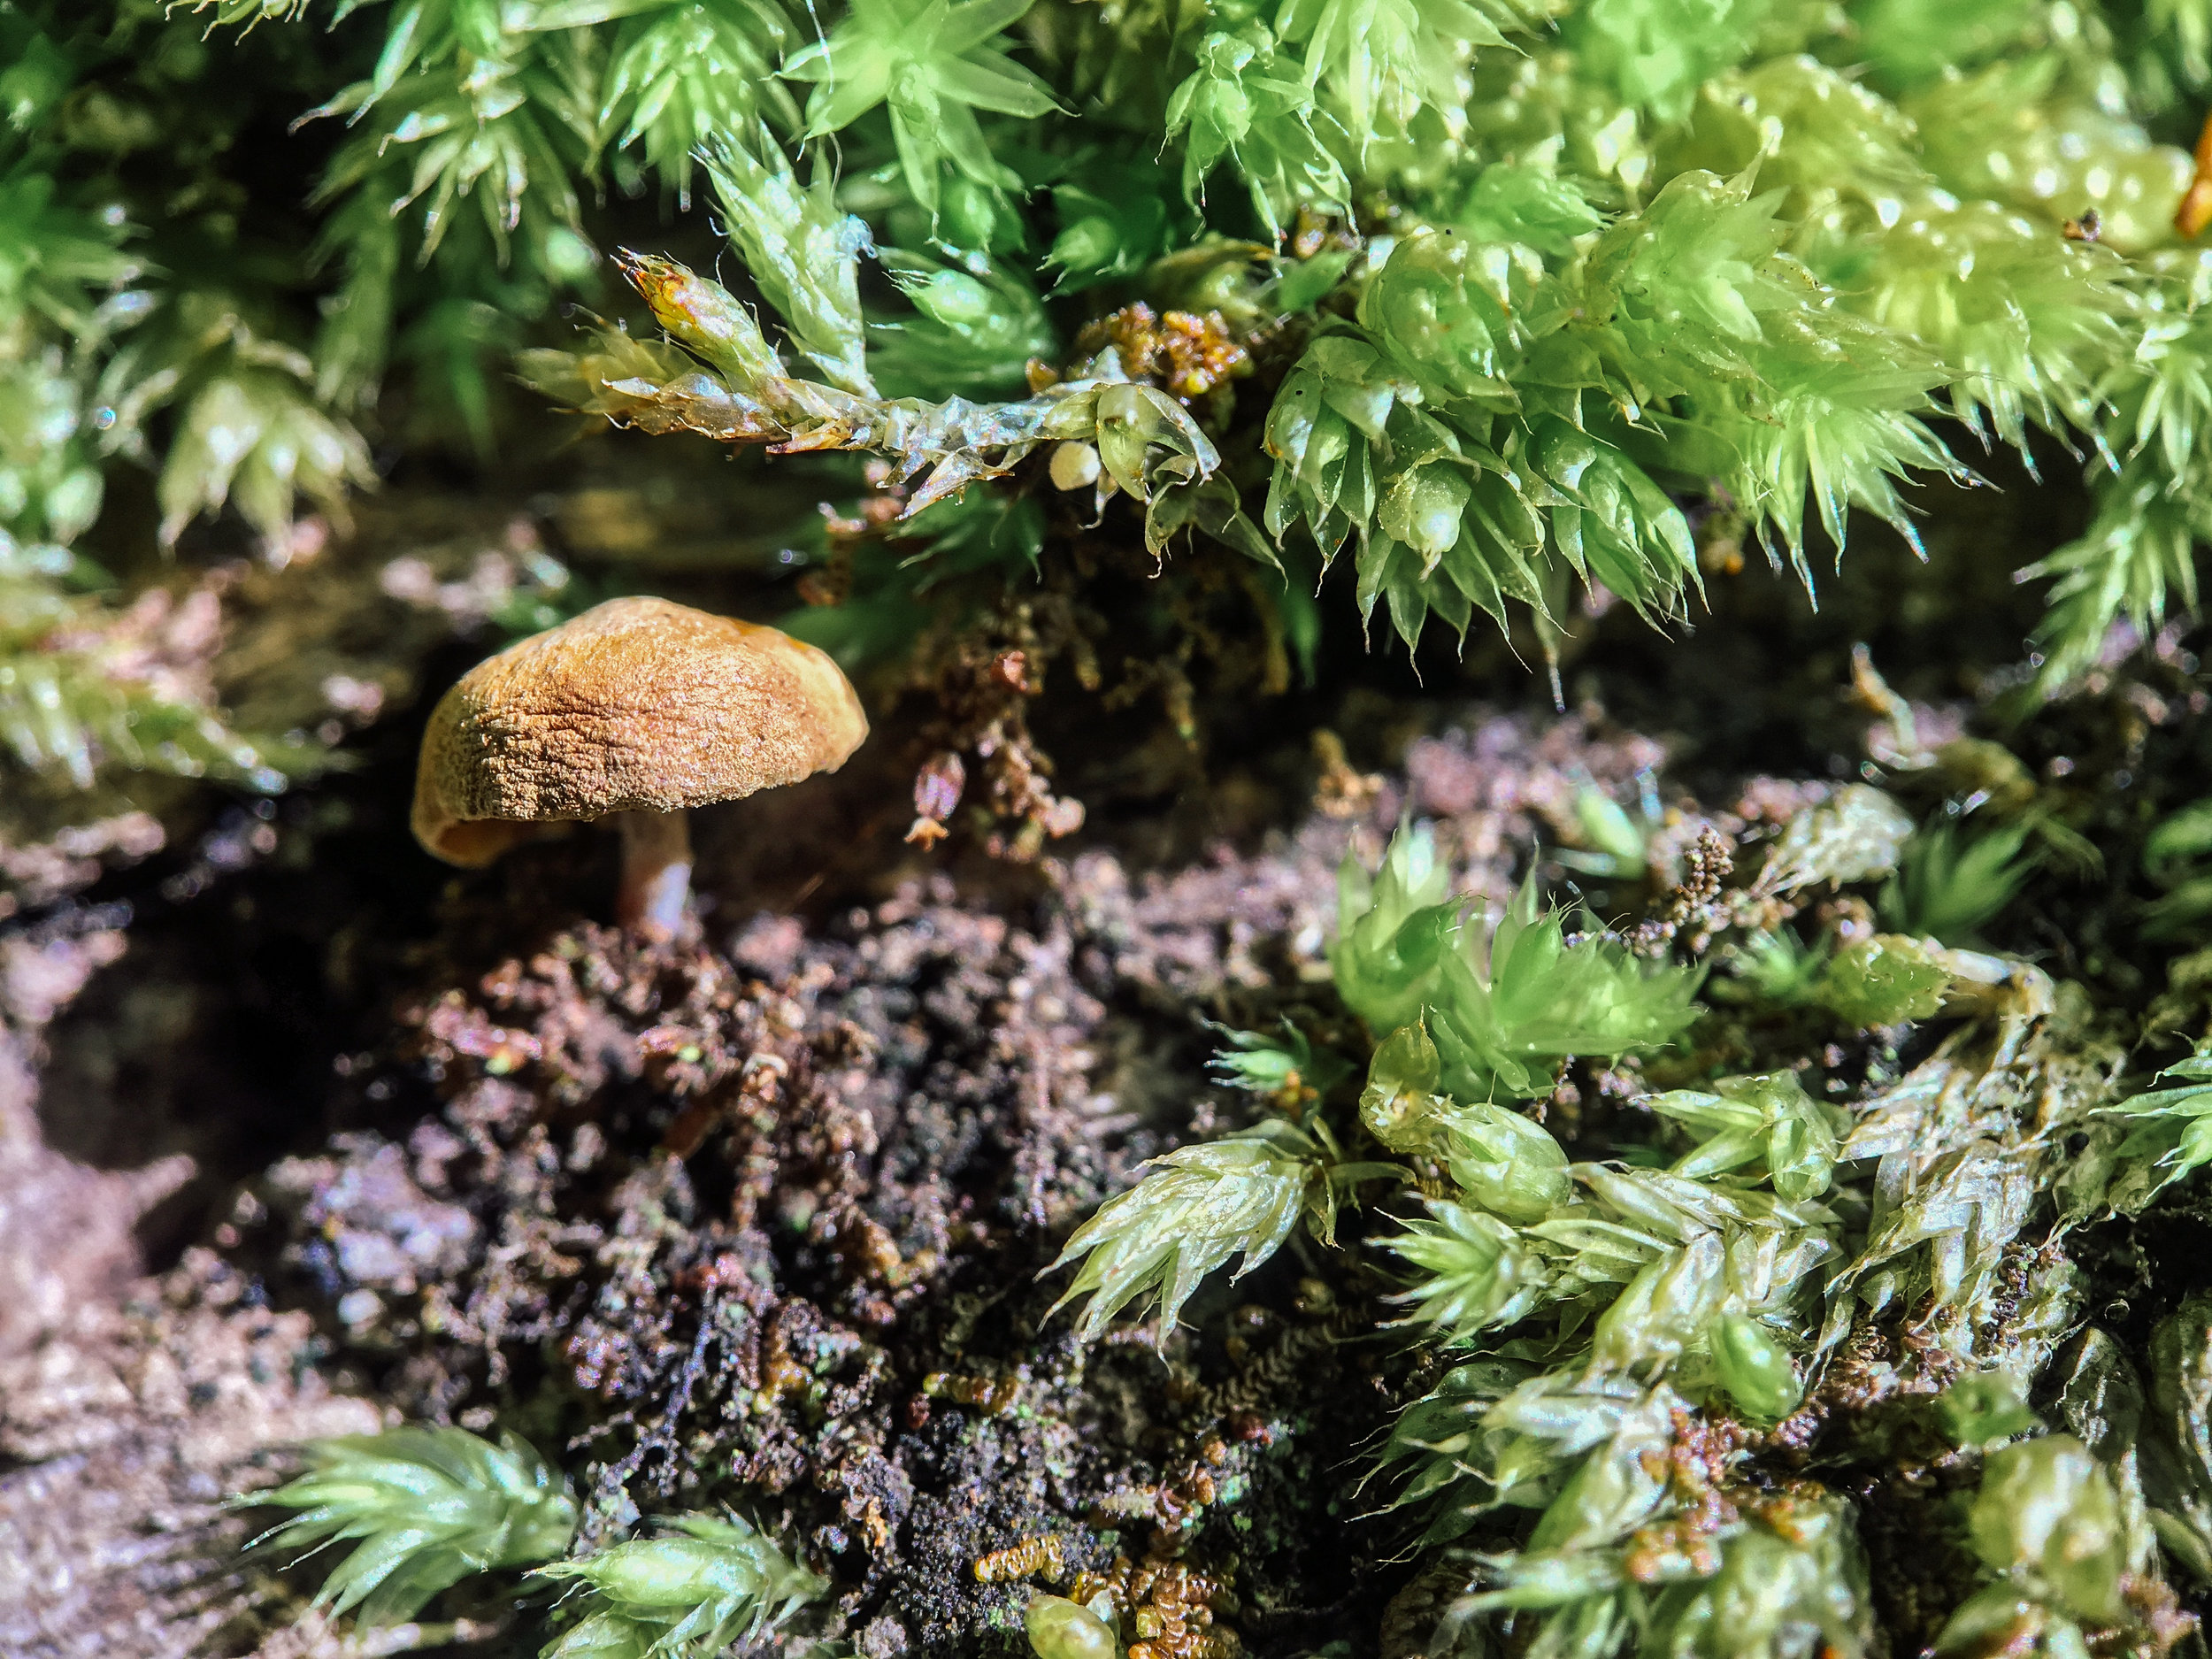 Tiny mushroom surrounded by liverworts. The latter are a type of non-vascular land plant.